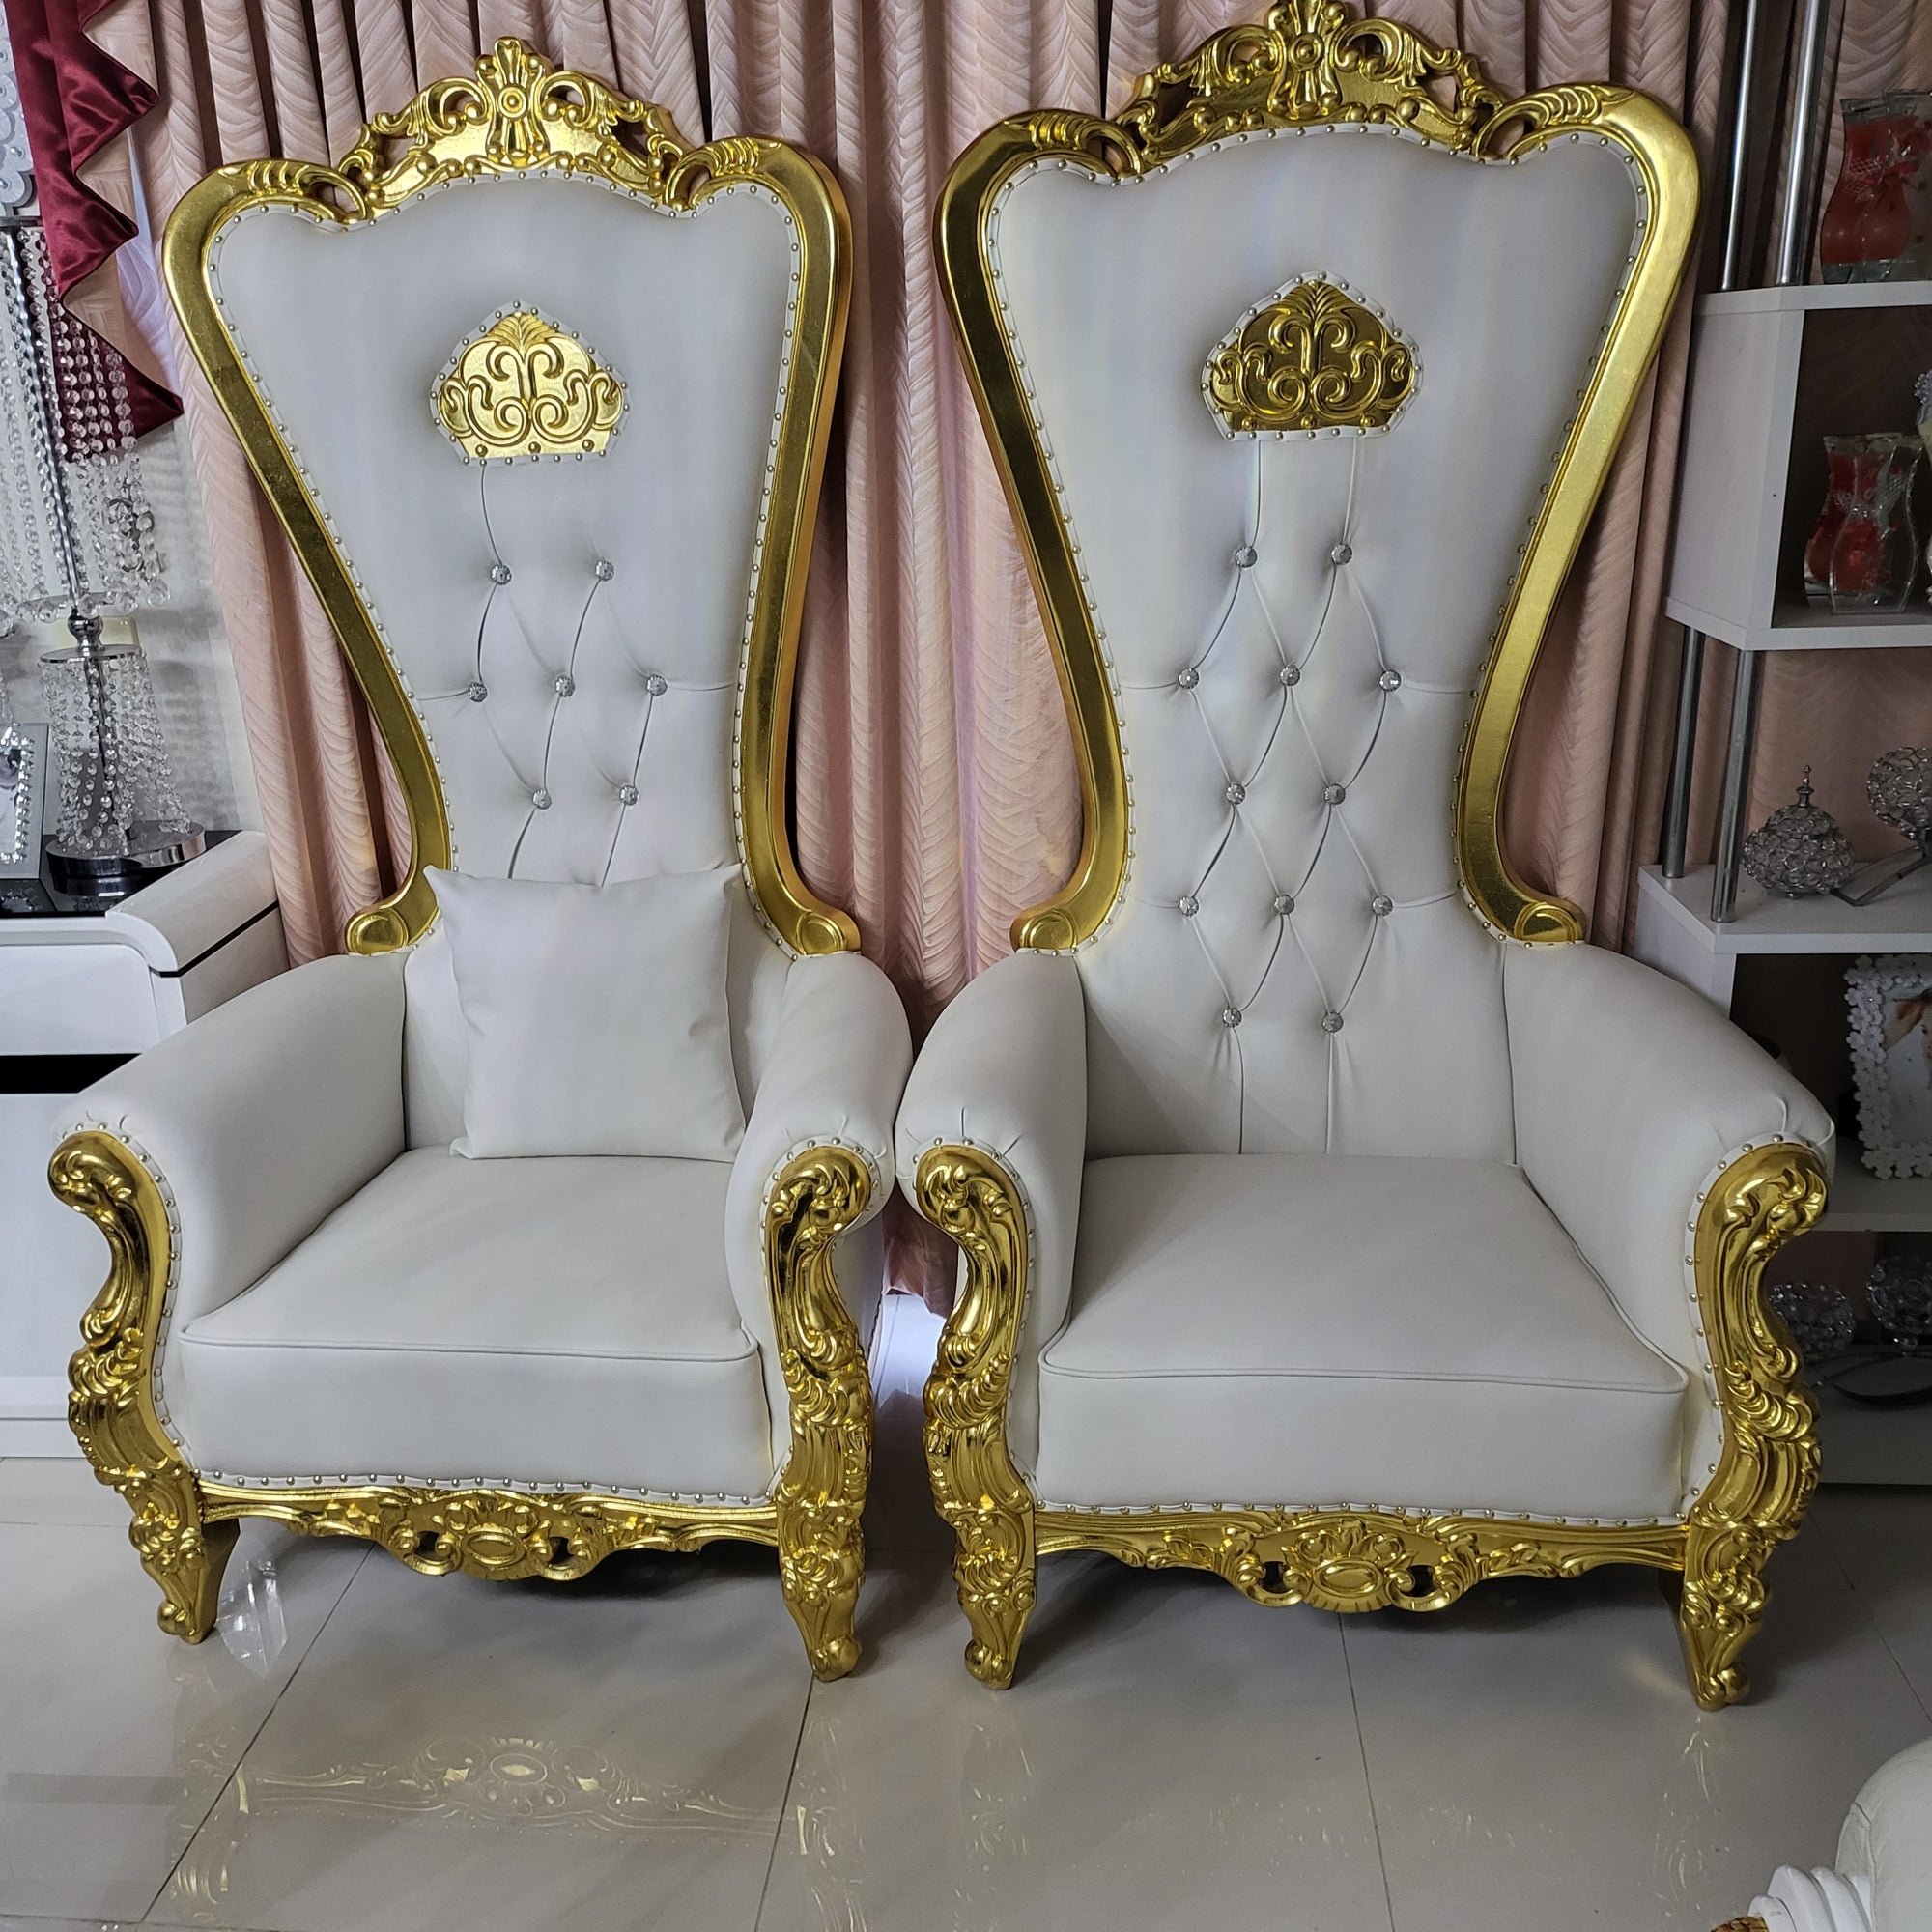 Gold Queen / King Throne Chairs with White Leather material